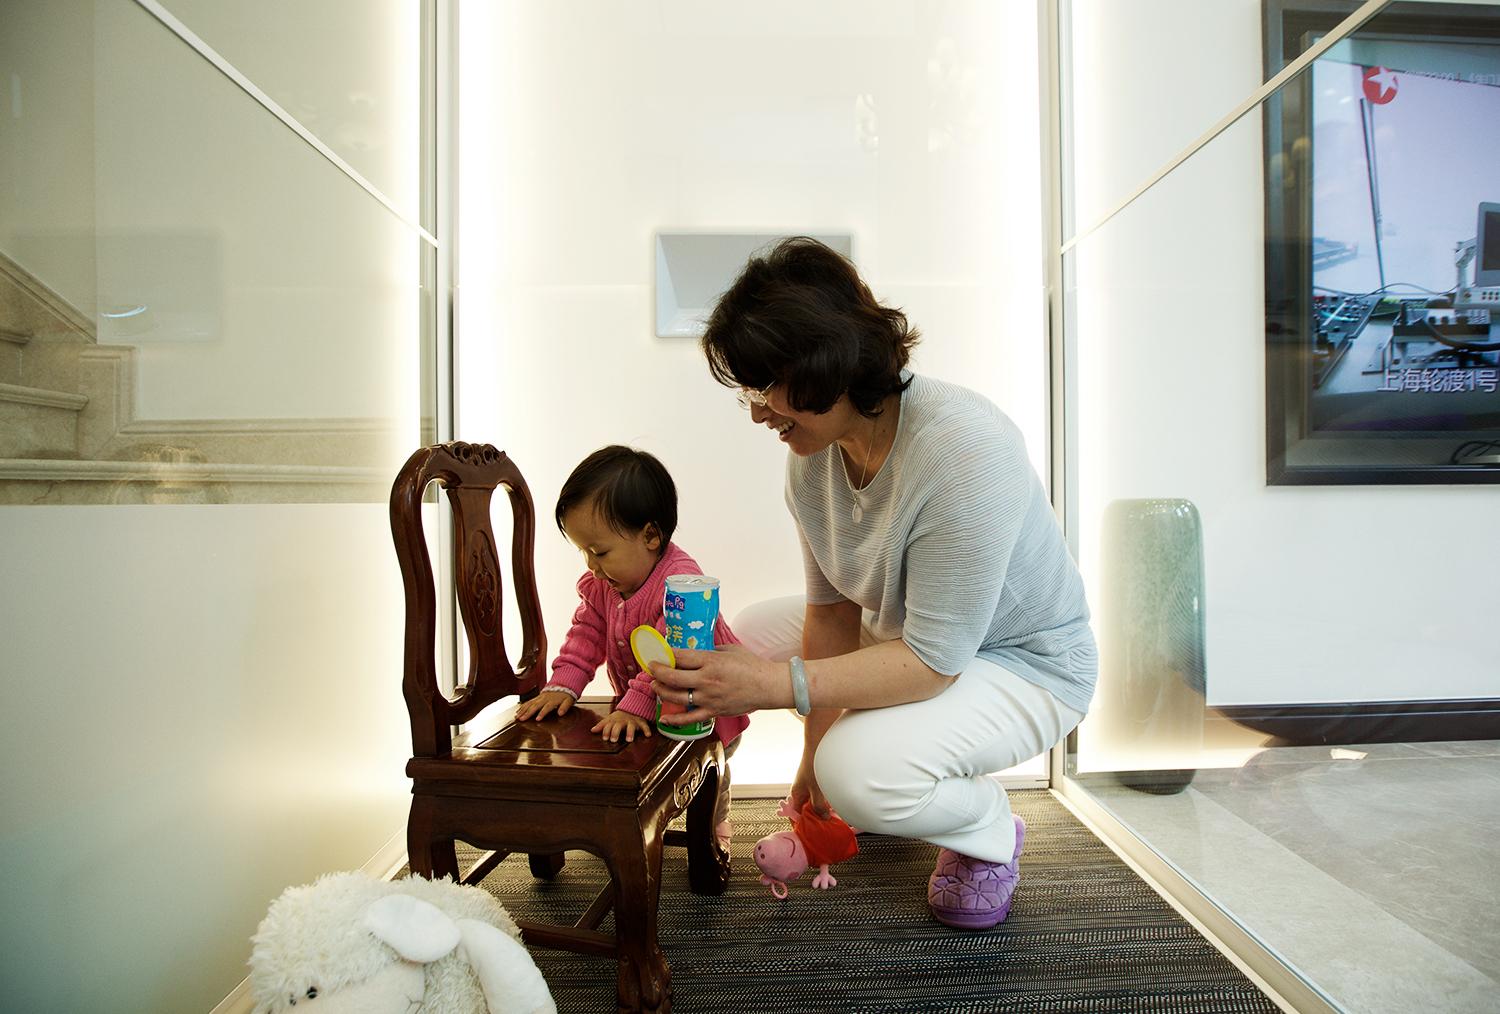 Grandma and a child in a home lift